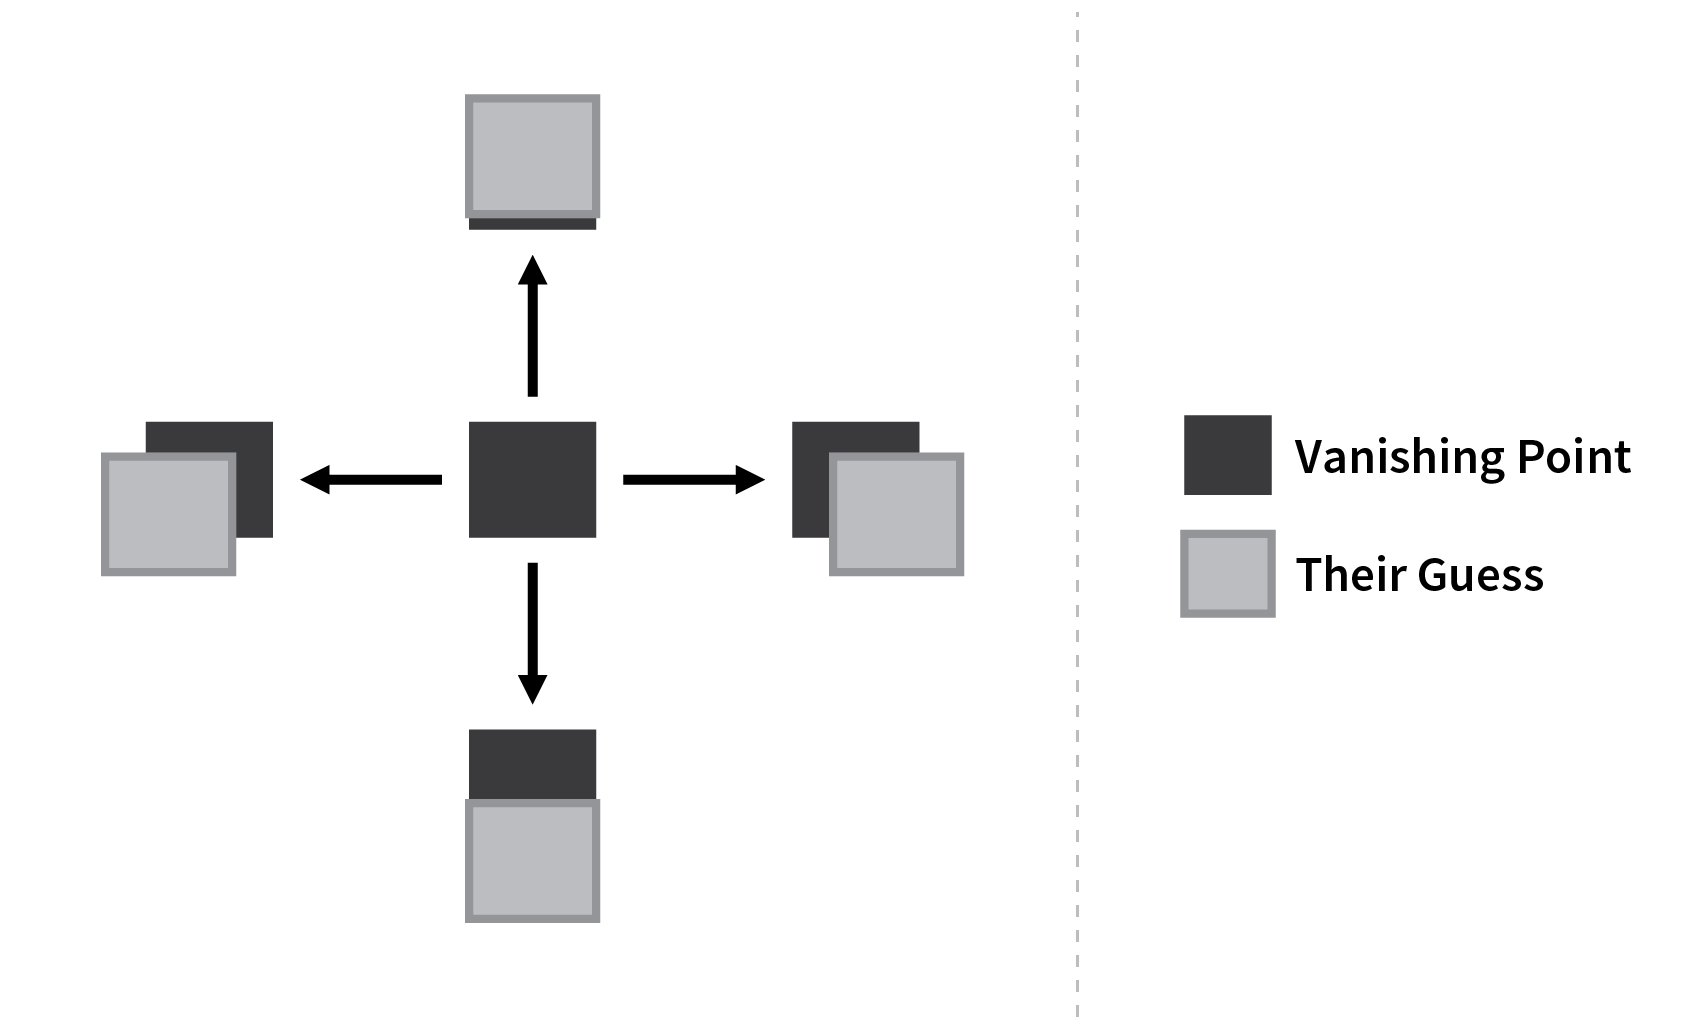 Black square in which study participants guessed where it disappeared. All of their guesses are always at a pointer farther ahead where it actually disappeared. Their guess was especially farther ahead when the box was moving down